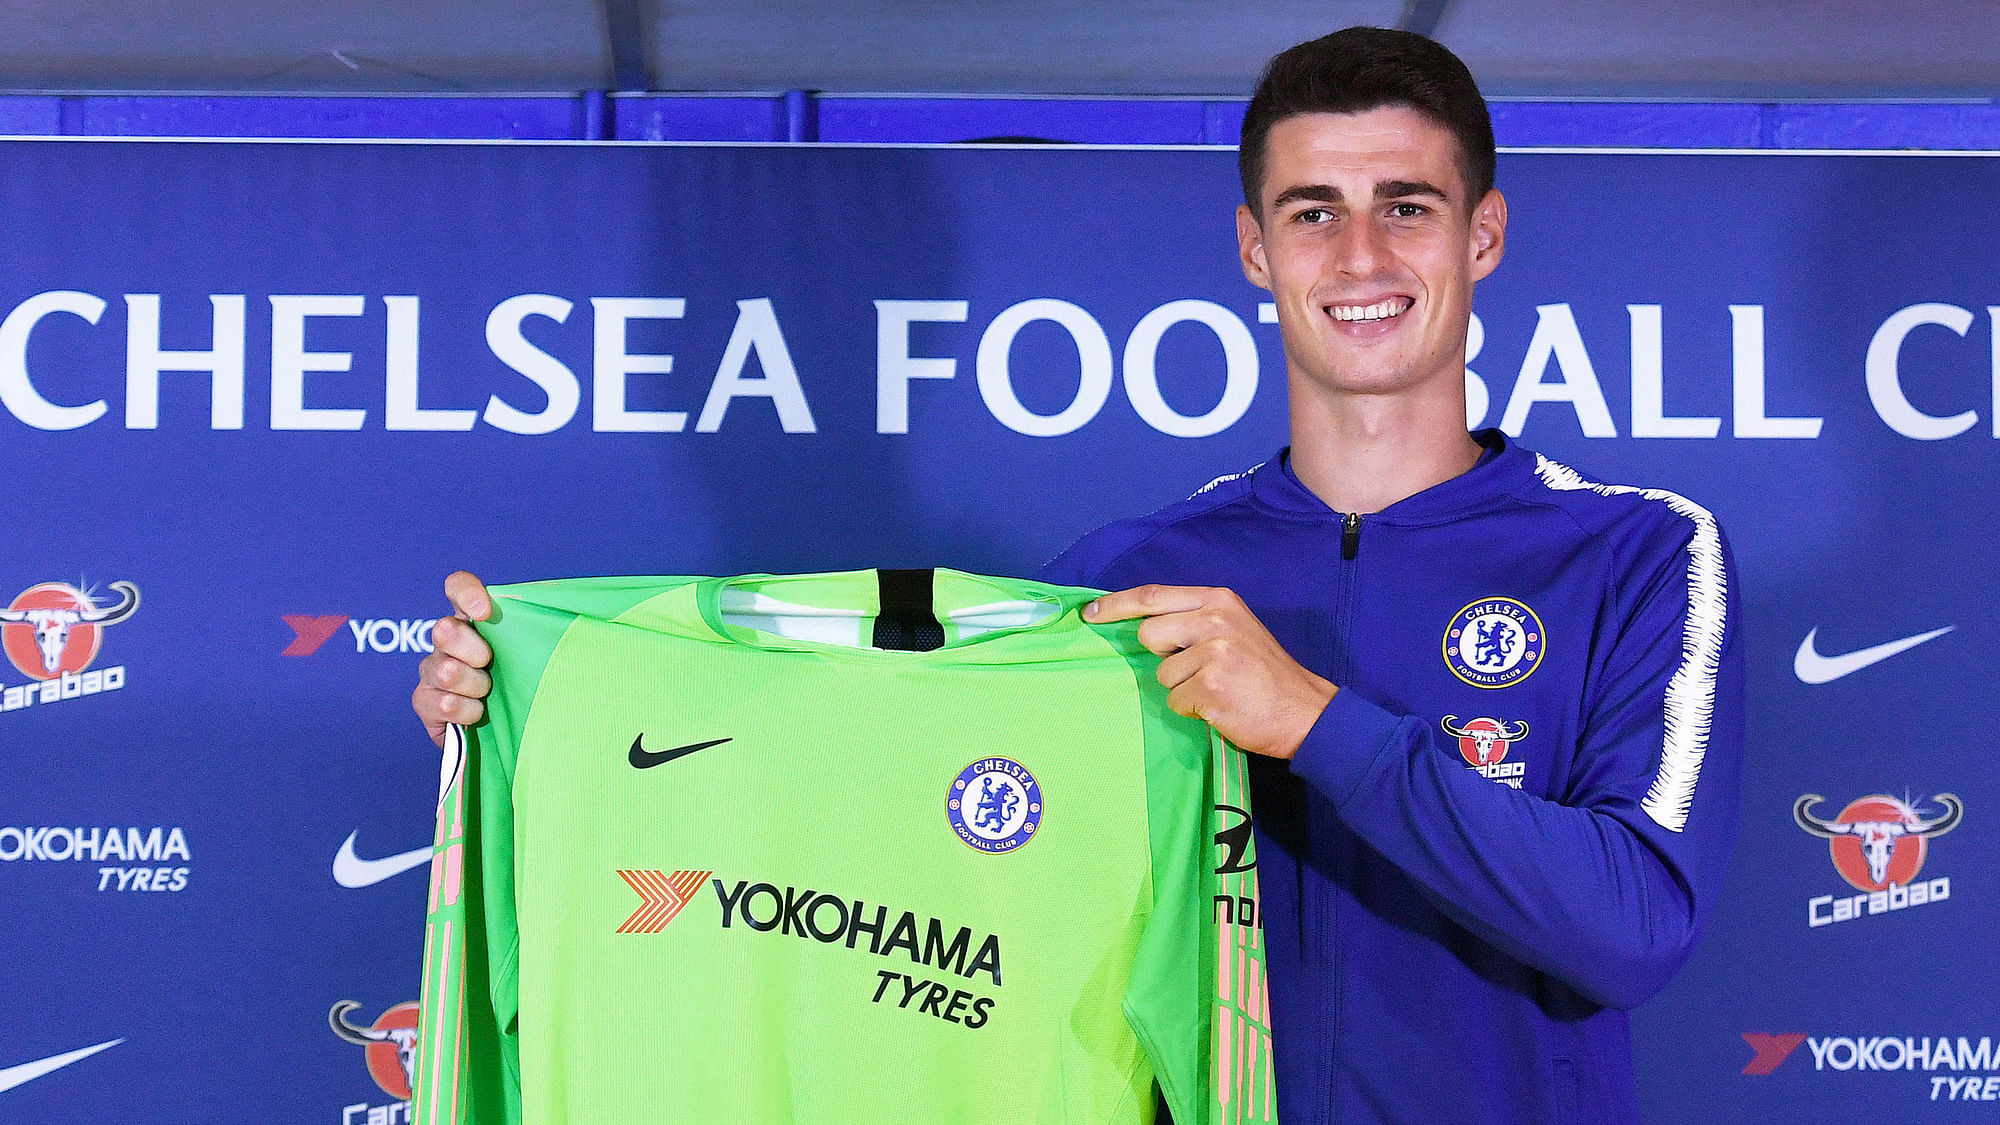 Chelsea has signed Athletic Bilbao goalkeeper Kepa Arrizabalaga for a record fee after selling Thibaut Courtois to Real Madrid.